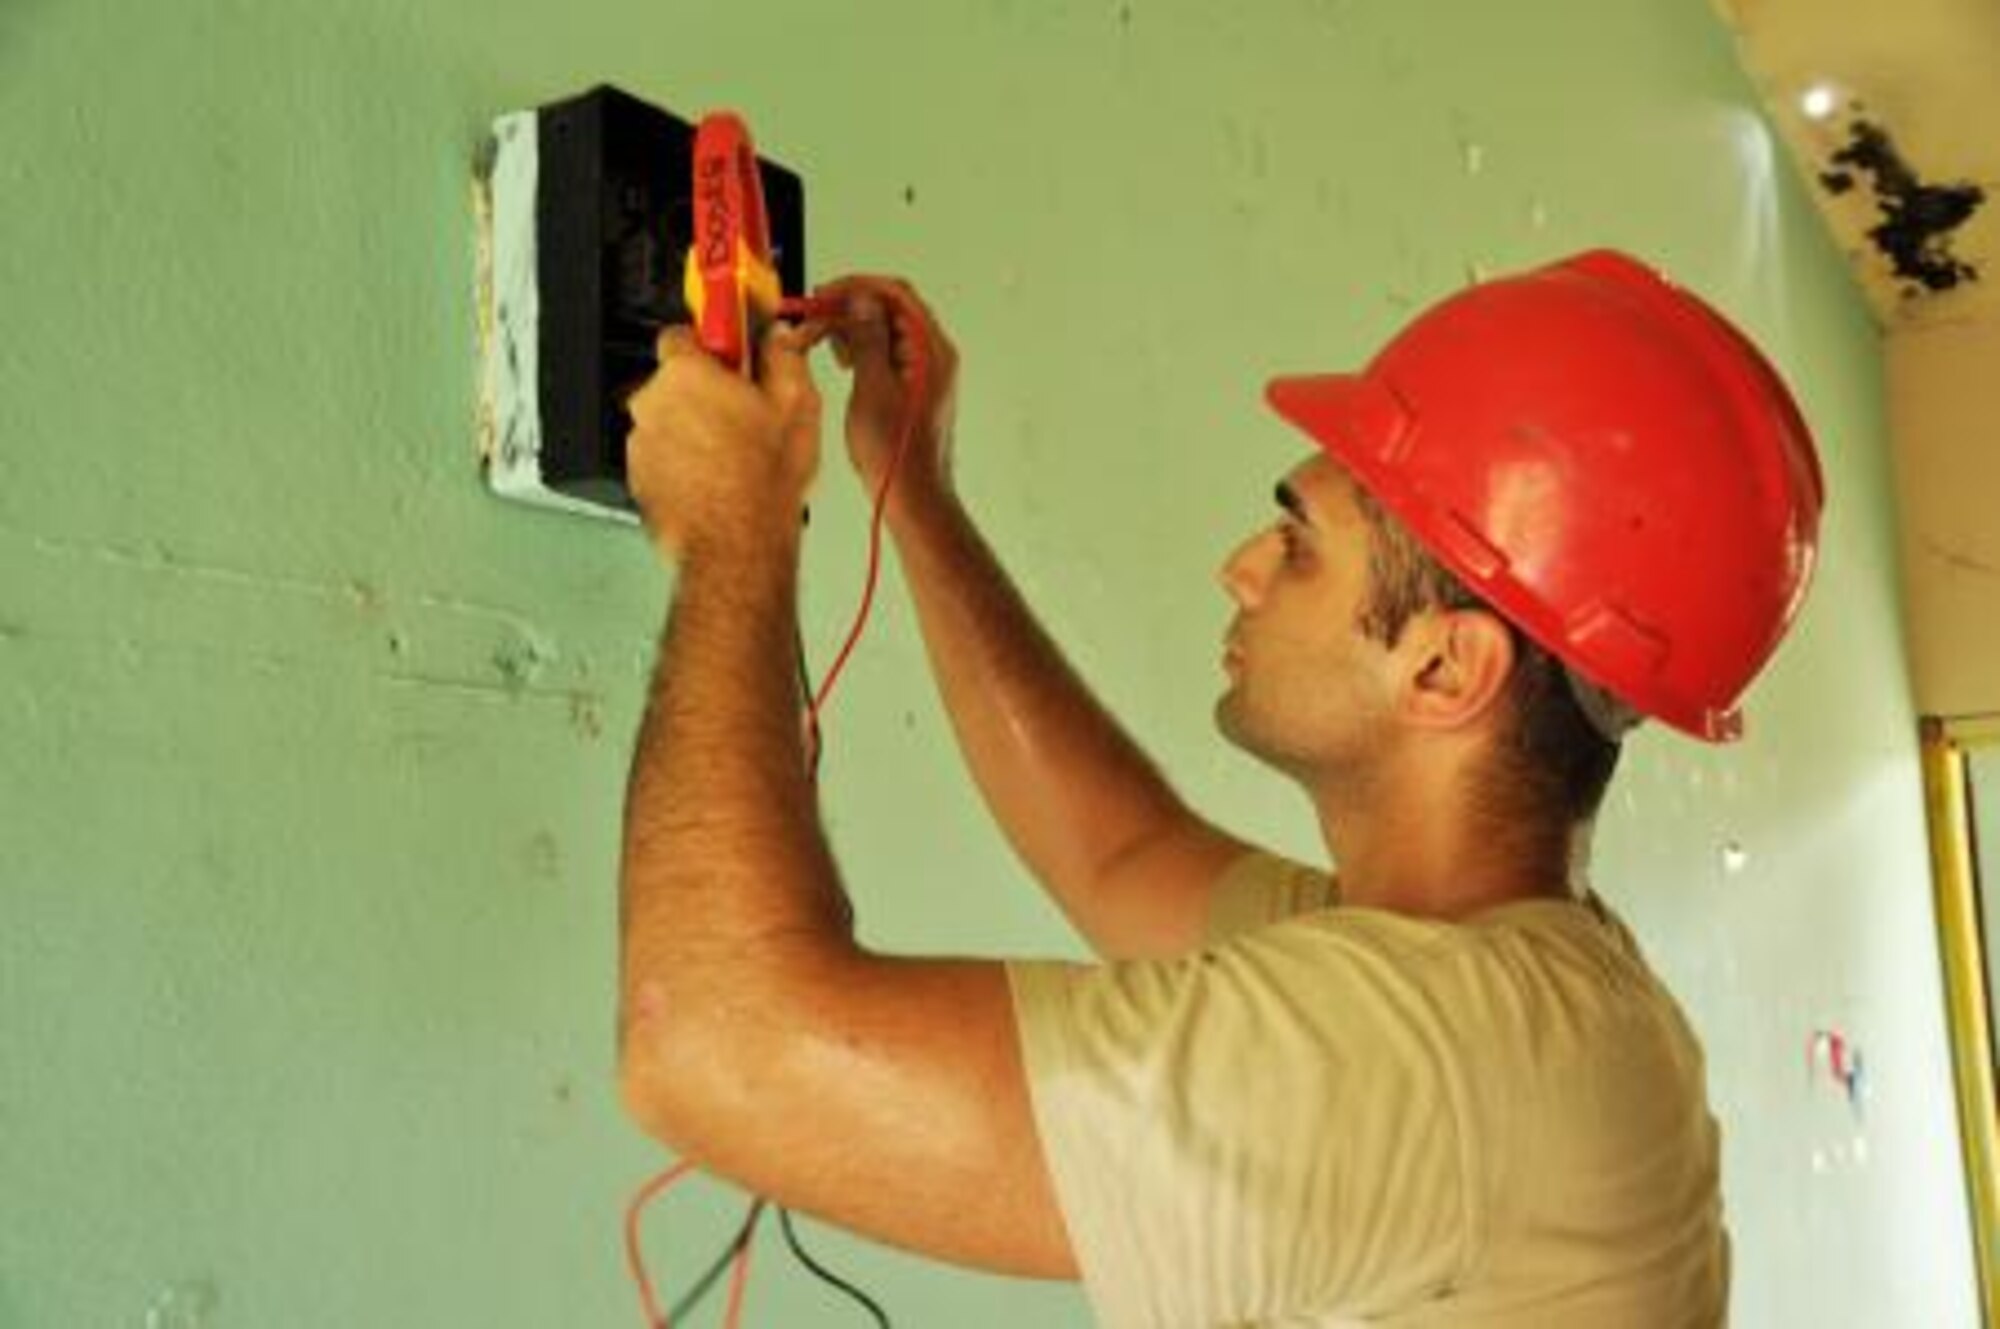 U.S. Air Force Staff Sgt. Serkan Acar, electrician from the 823rd RED HORSE Squadron, troubleshoots the electrical system of Hattieville Government Pre-School June 4, 2013, as part of an exercise called New Horizons. Using excess building materials, civil engineers plan to repair the leaky roof of the school. Civil Engineers from both the U.S. and Belize are constructing various structures at schools throughout Belize as part of an exercise called New Horizons. Building these facilities will support further education for the children of the country and provide valuable training for U.S. and Belizean service members. (U.S. Air Force photo/Capt. Holly Hess)